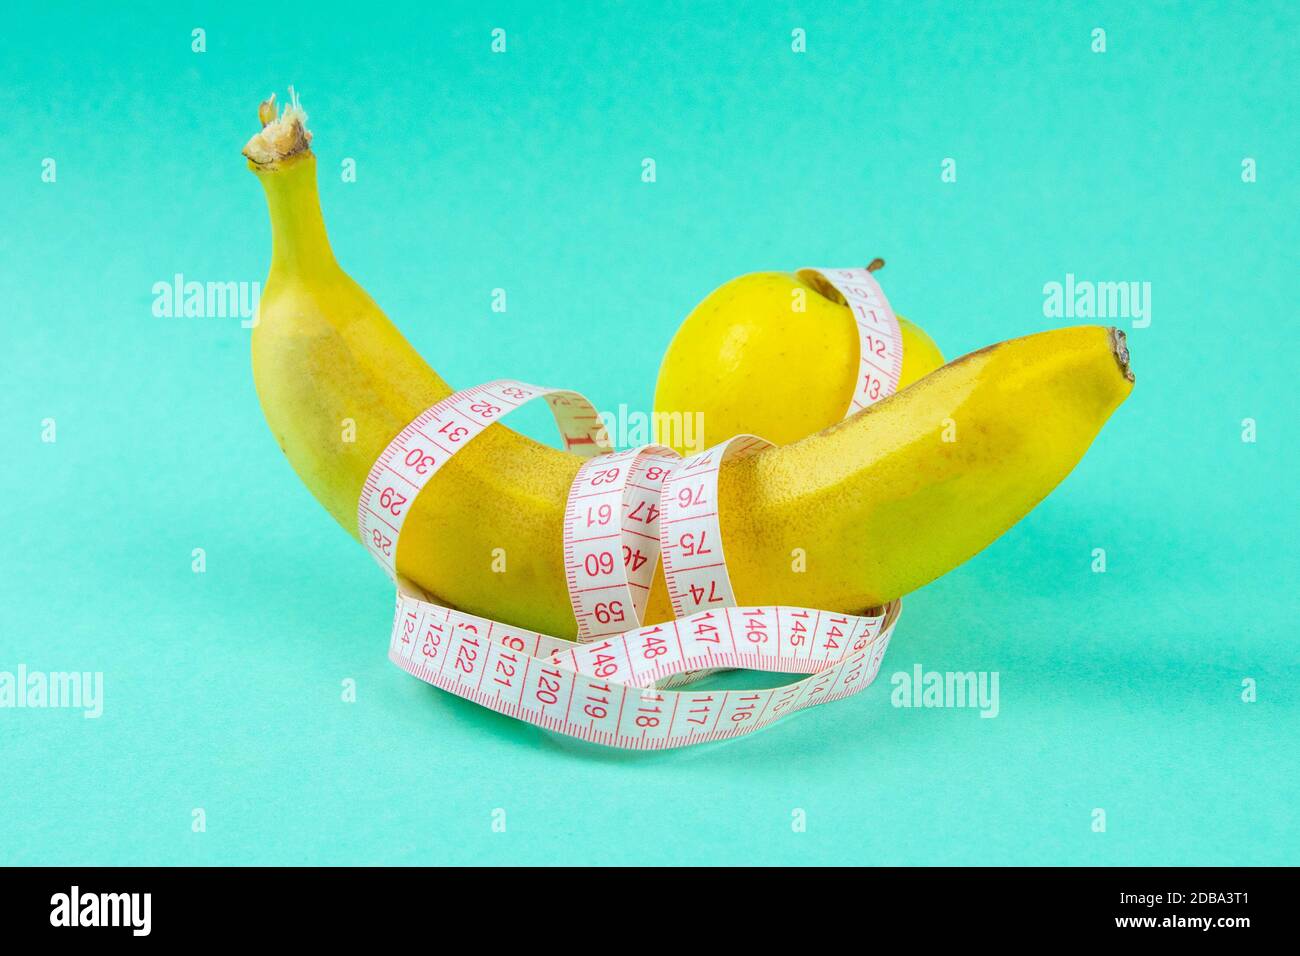 Different types of fruit, such as apples and bananas lie on a single-footed base and are wrapped in a measuring tape - concept for healthy weight loss Stock Photo